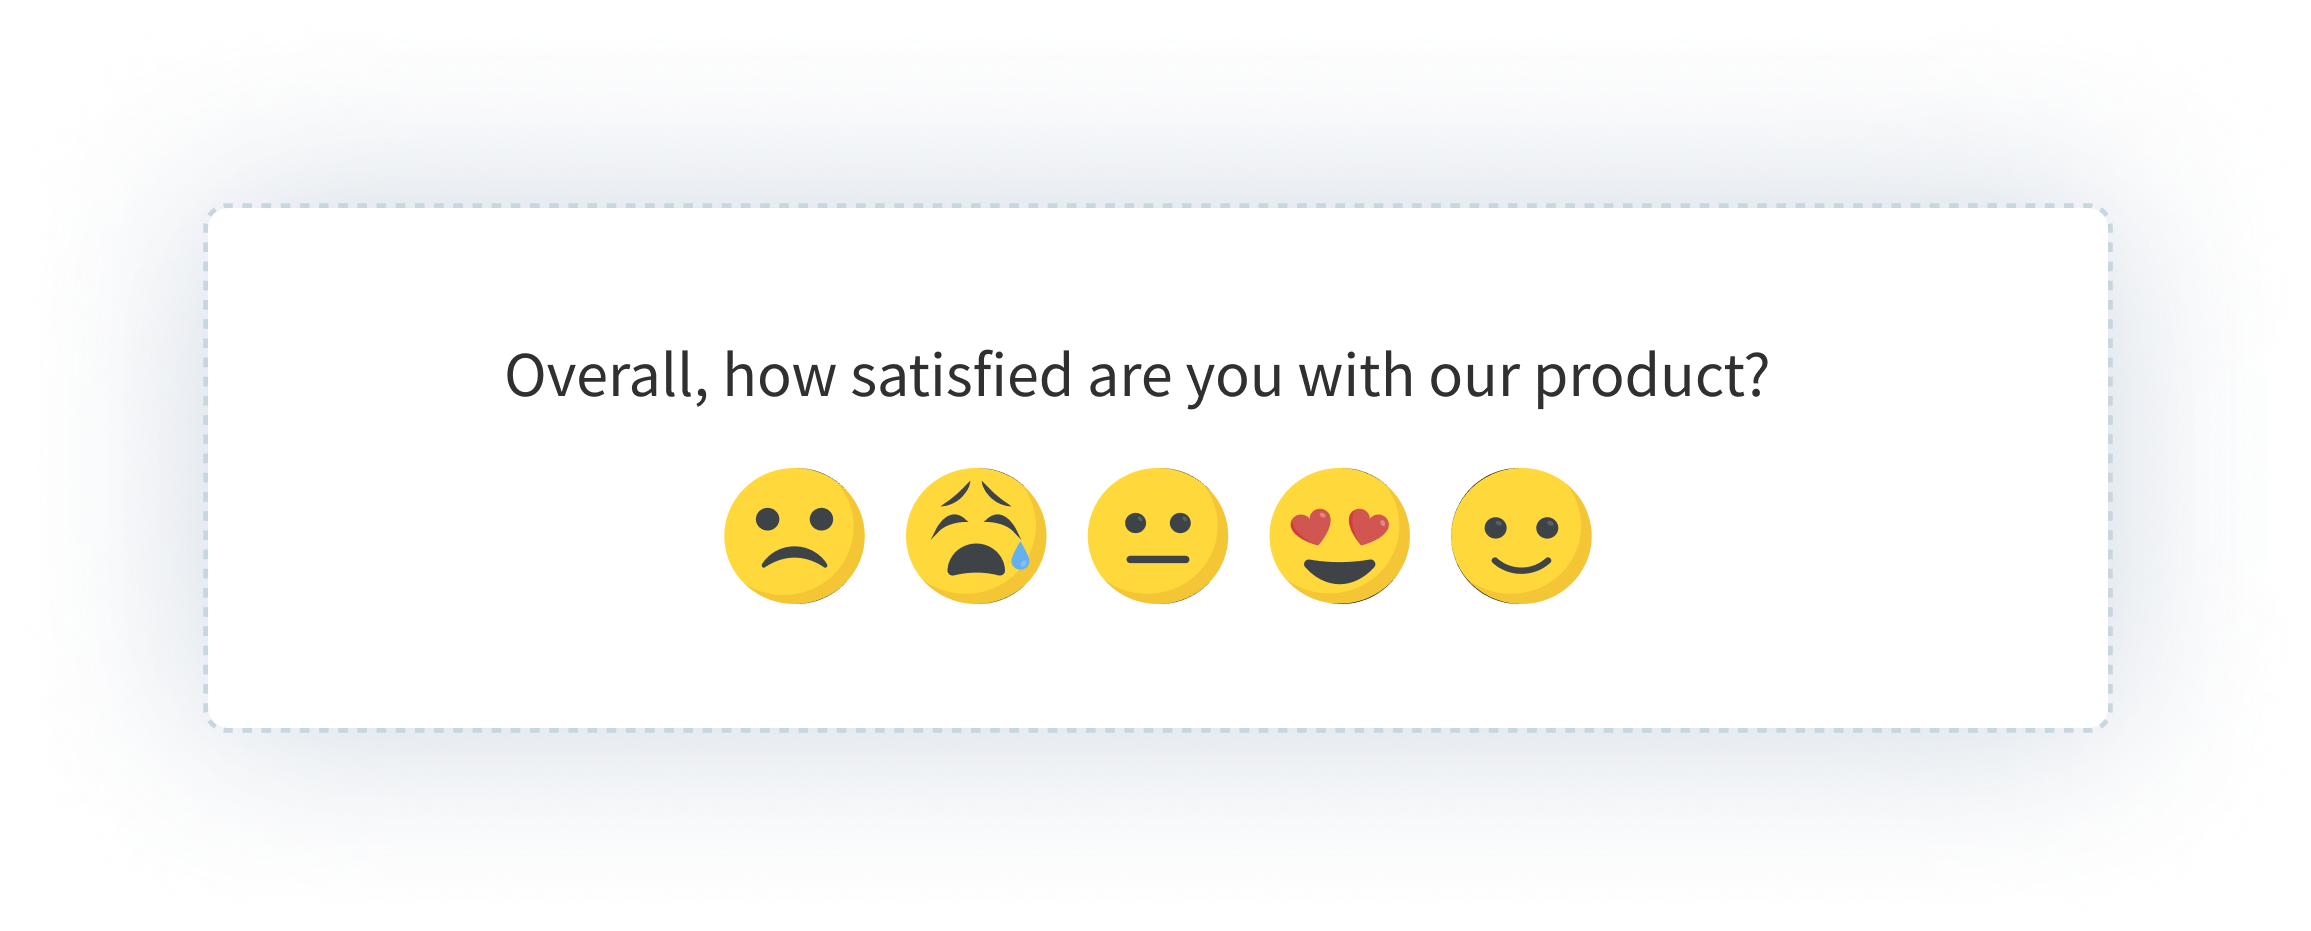 Customer Experience Survey Question on Product Feedback